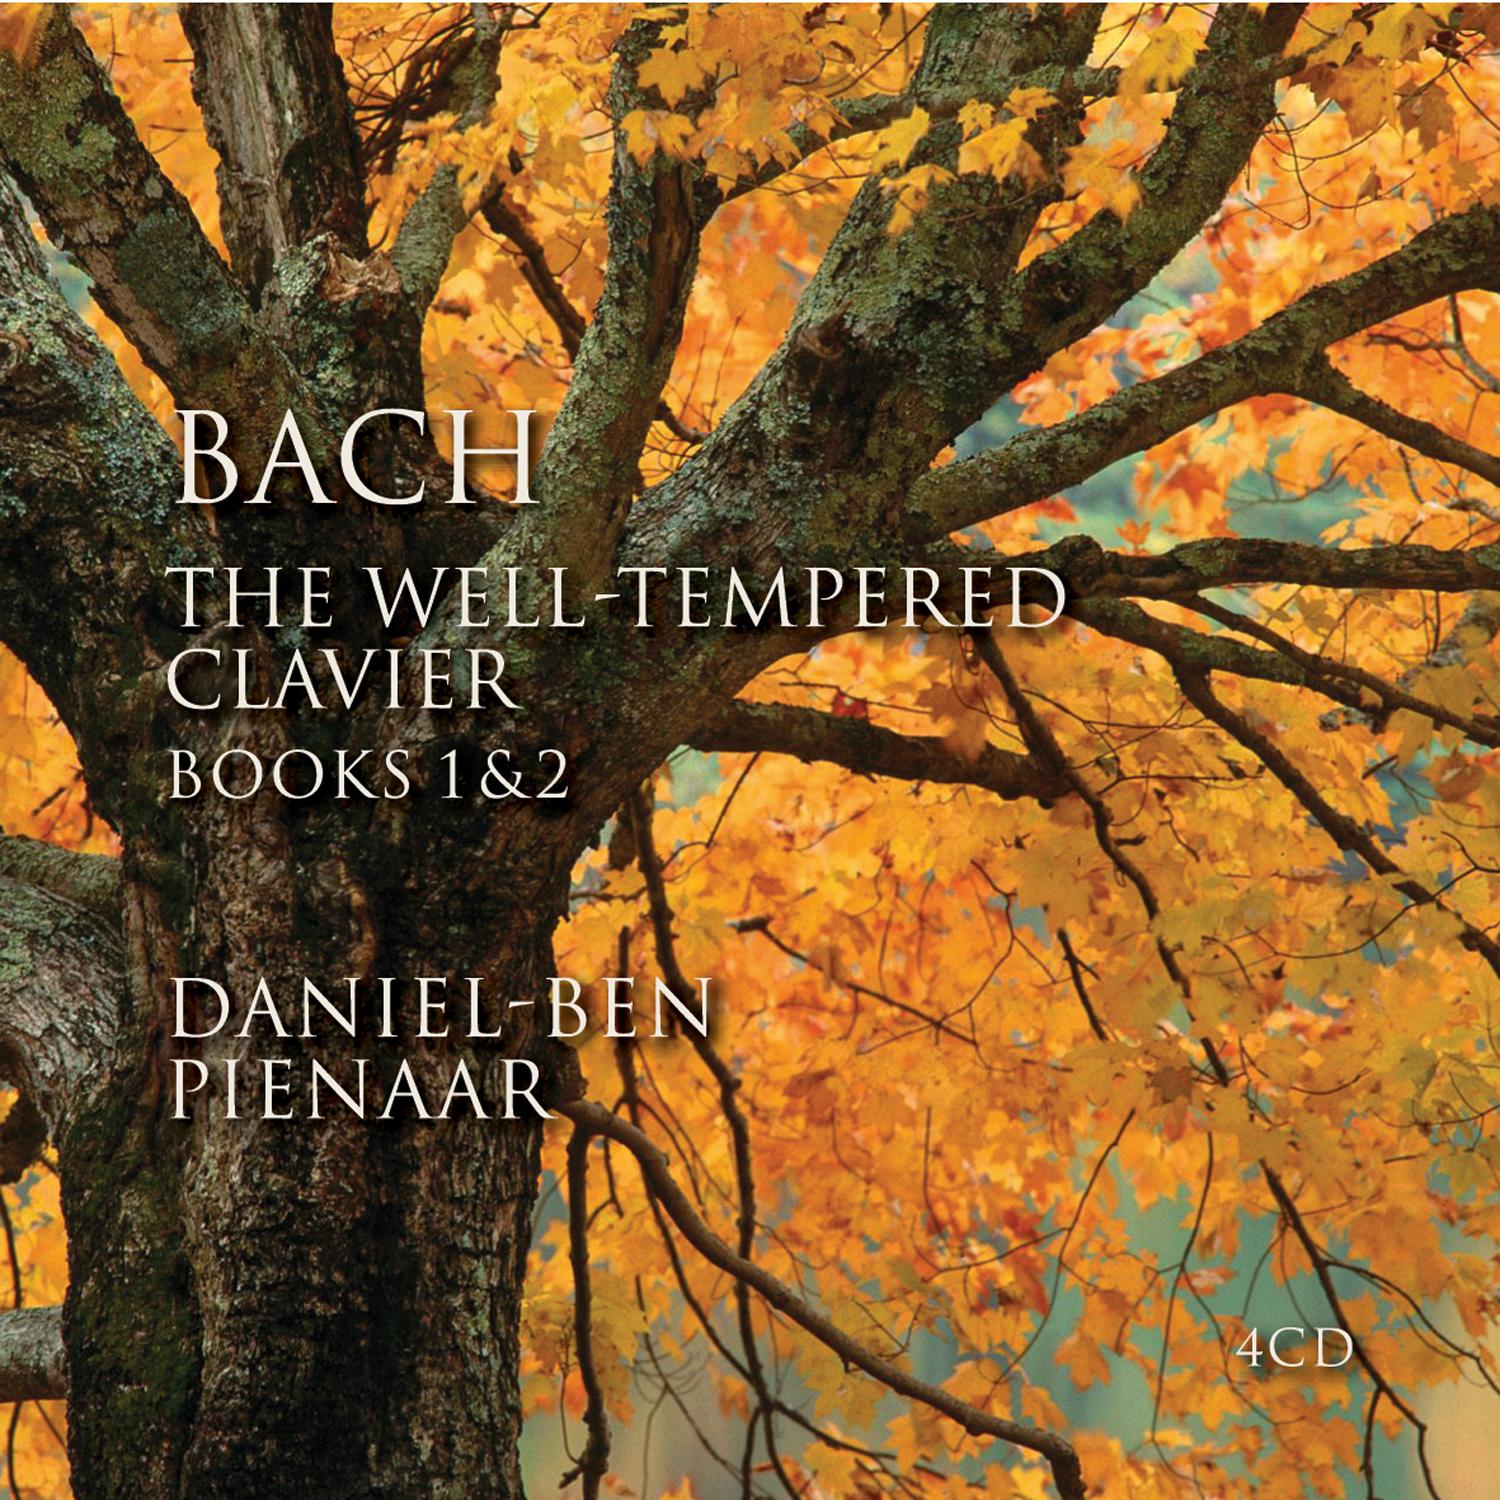 The Well-Tempered Clavier, Books 1 & 2, BWV 846-893: Book 2: Fugue No. 24 in B Minor, BWV 893